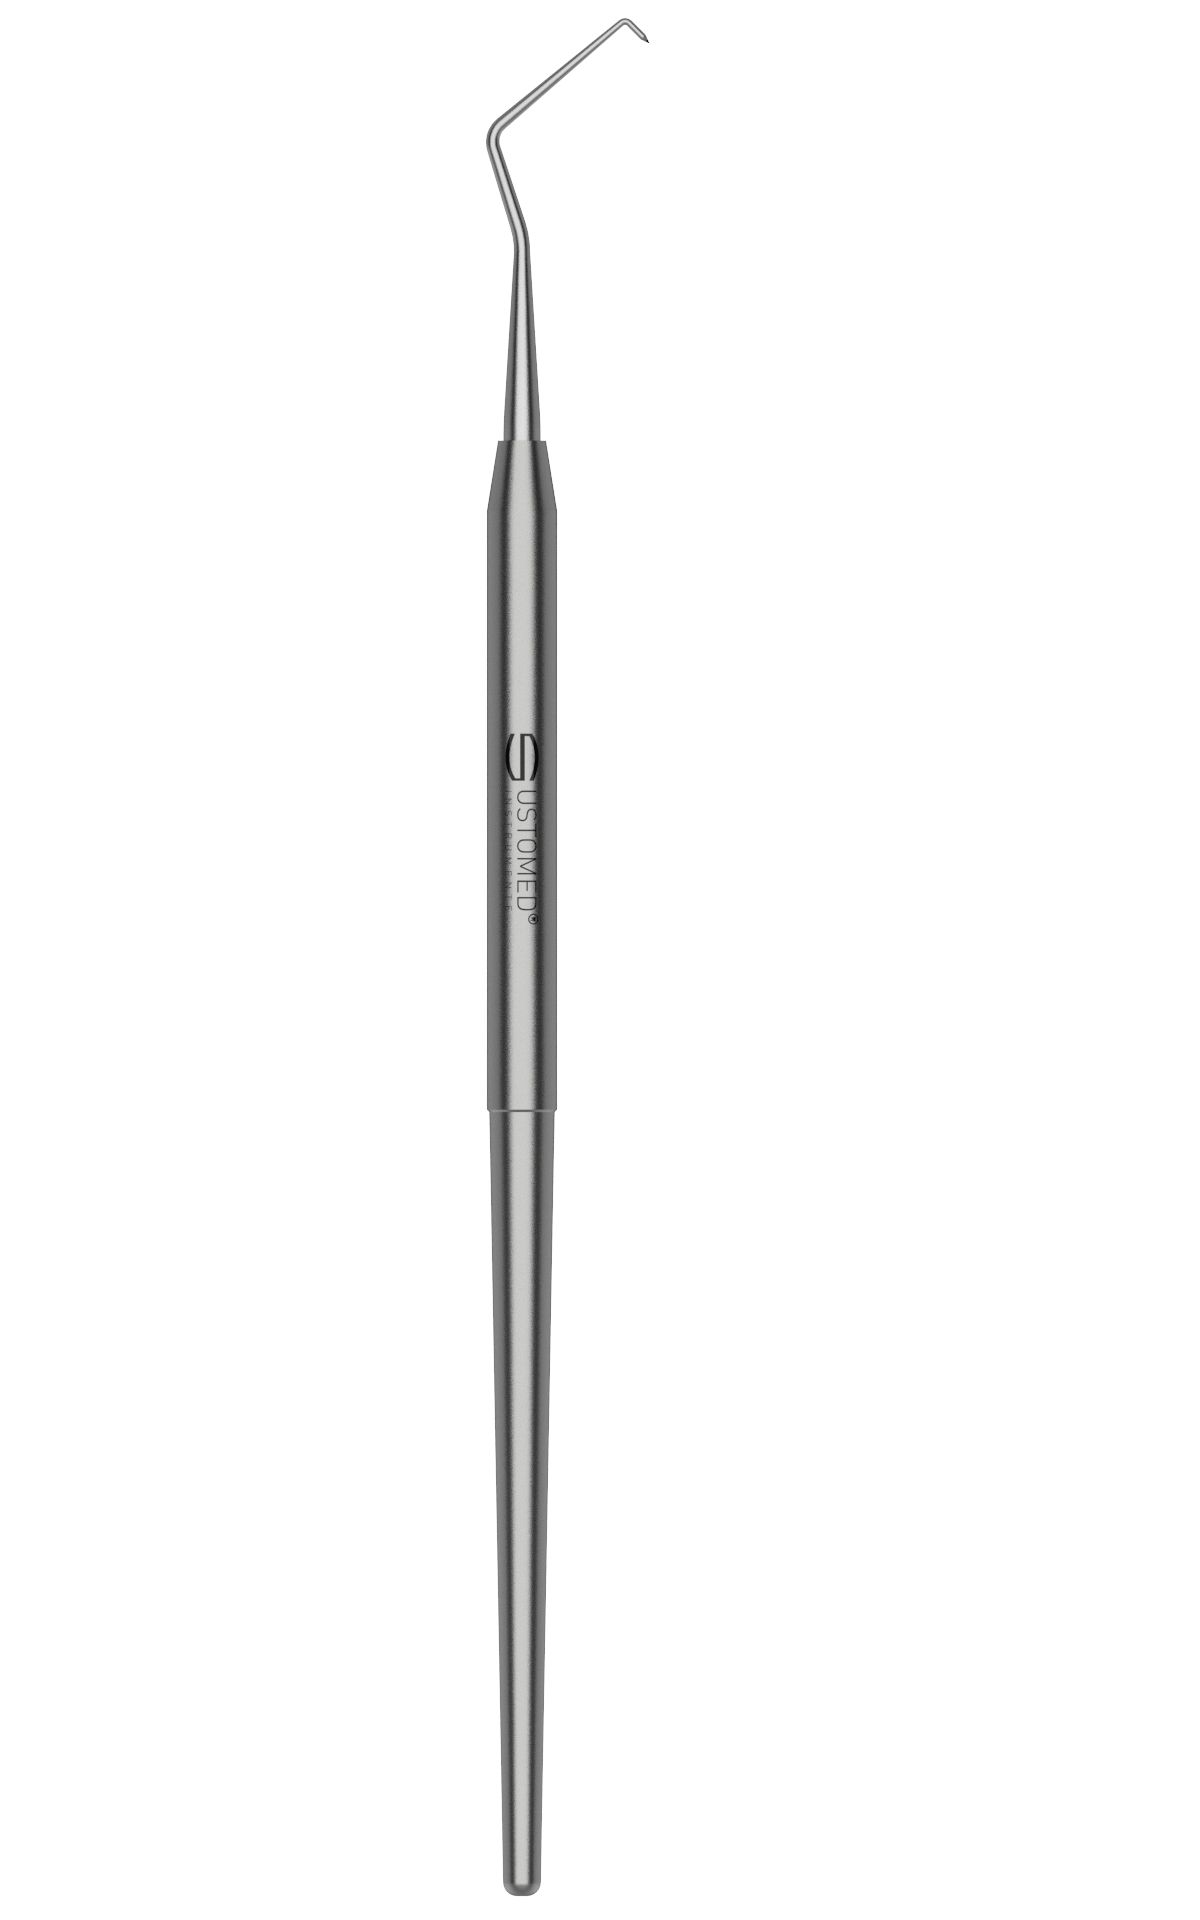 Probe, size 17, single-ended, round handle